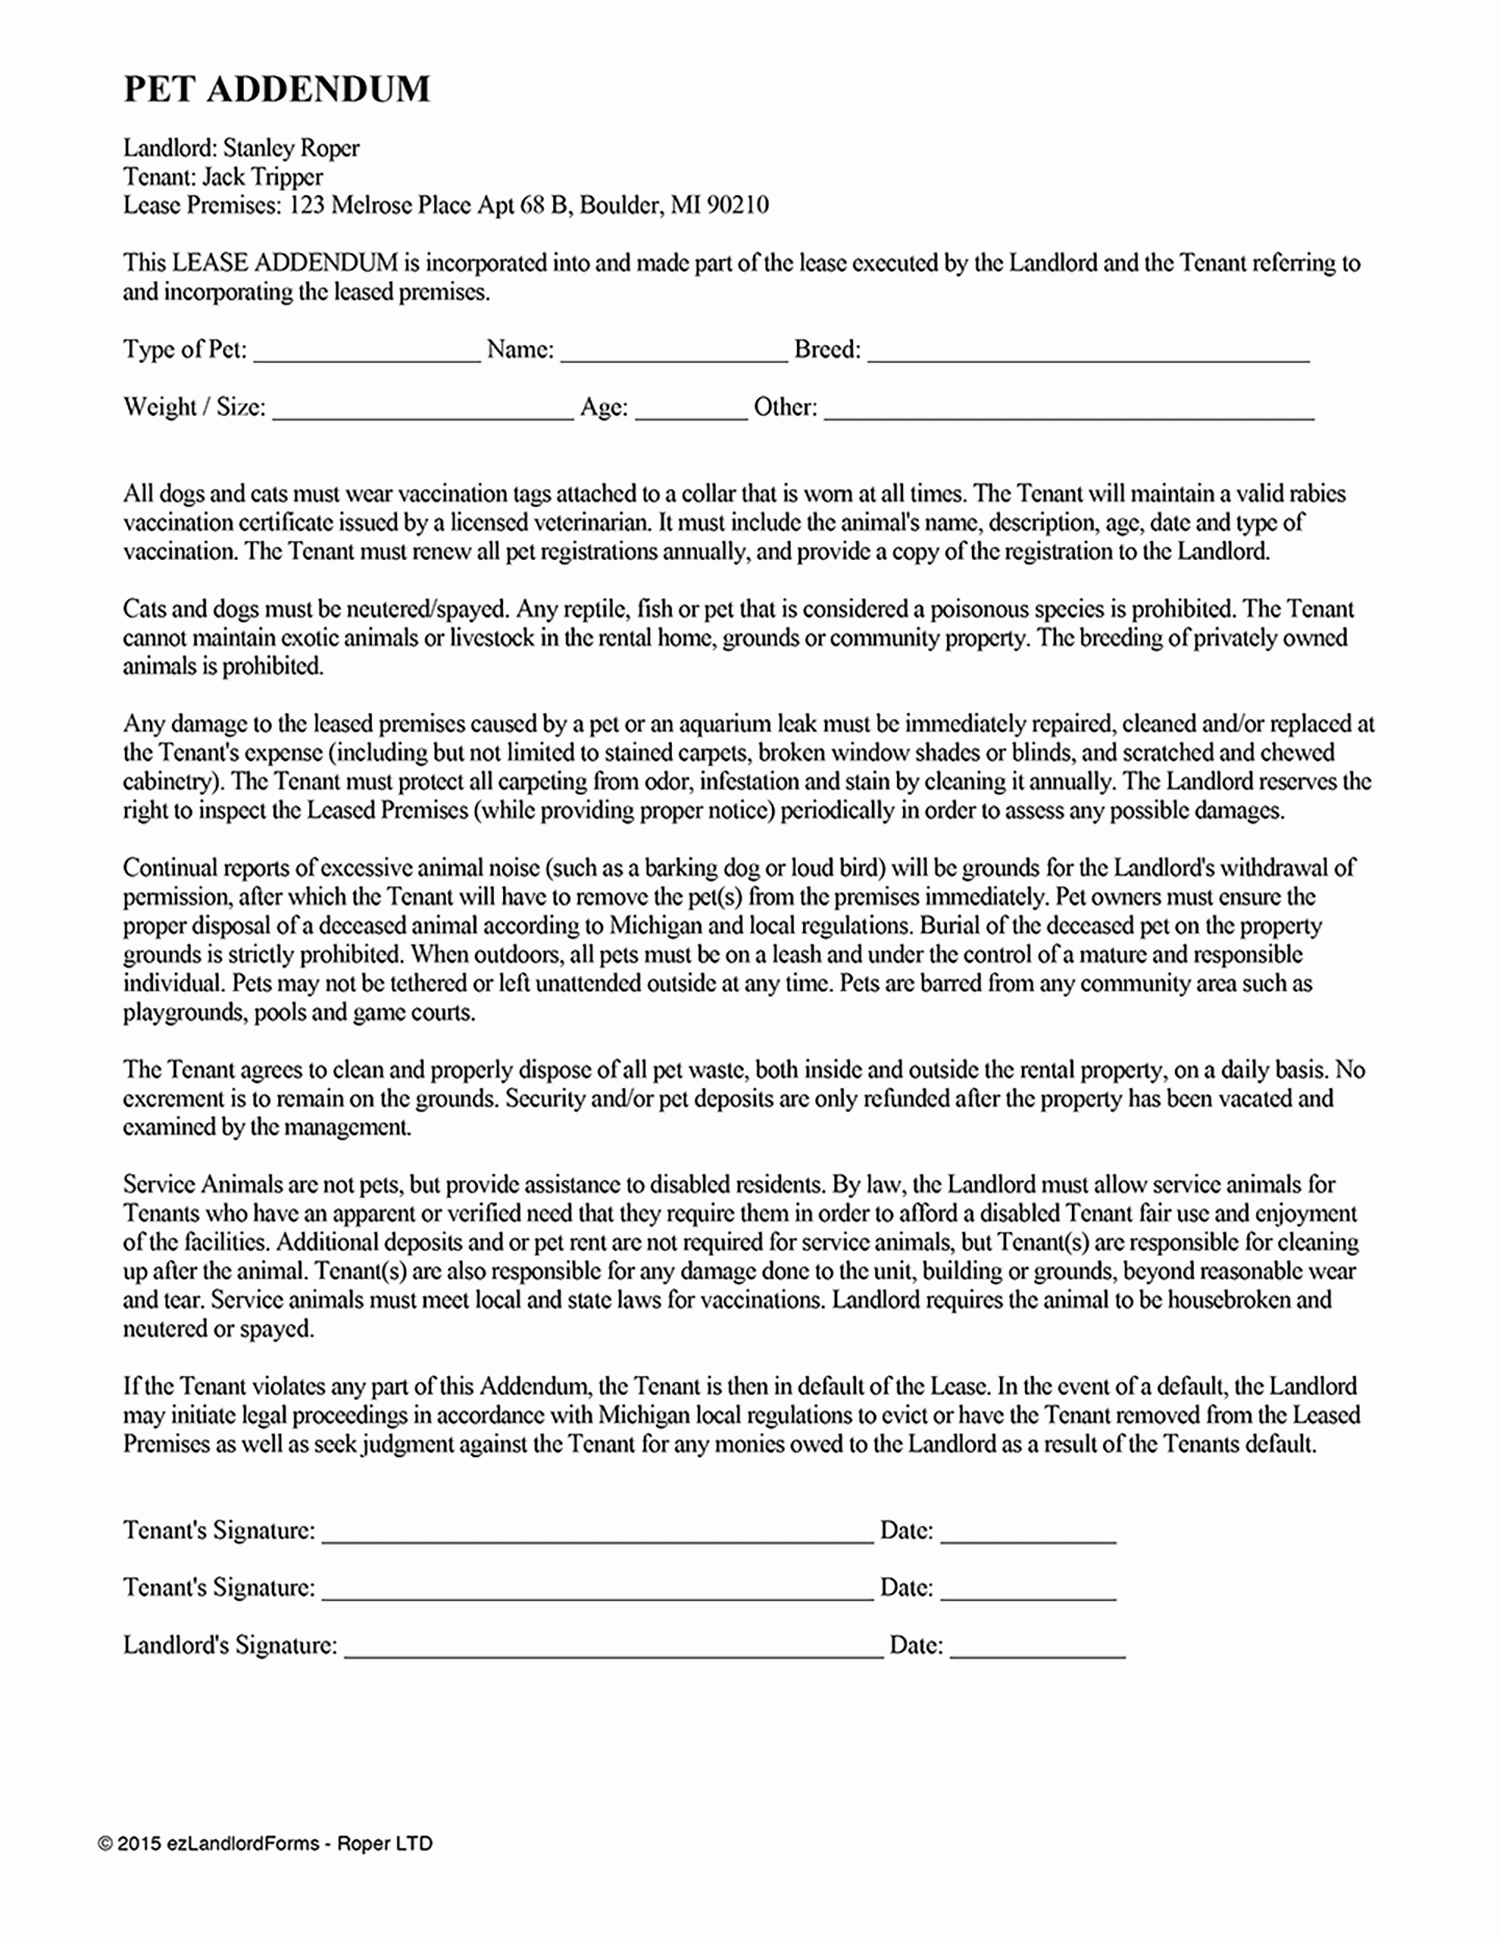 Professional Addendum To Lease Agreement Template